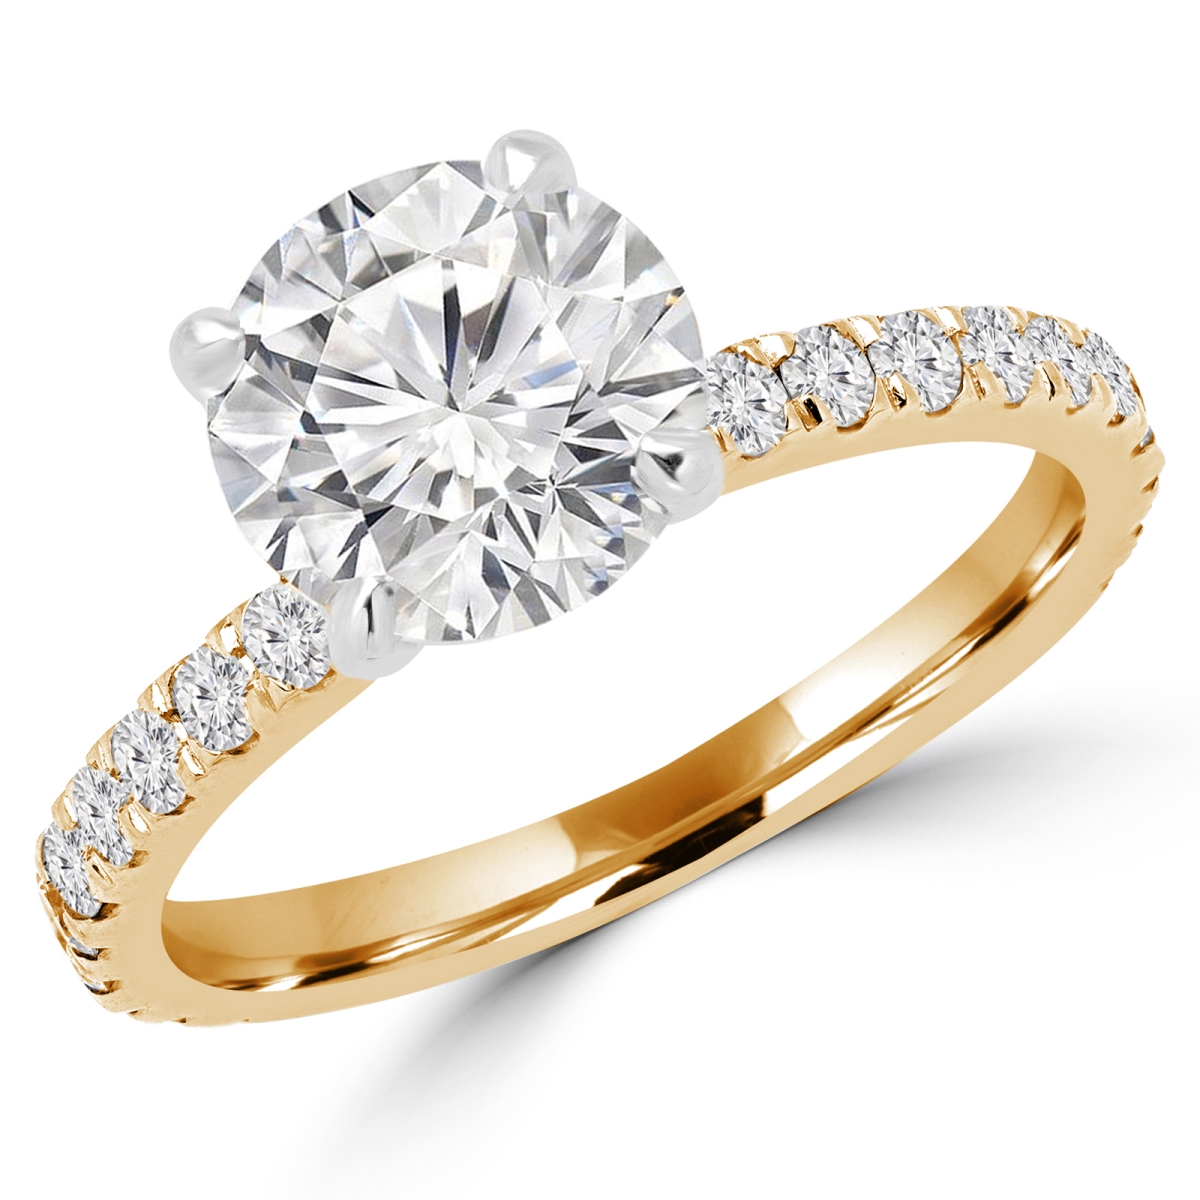 Picture of Majesty Diamonds MD160340-4.25 1 CTW Round Cut Diamond Multi Stone Engagement Ring in 14K Yellow Gold - Size 4.25